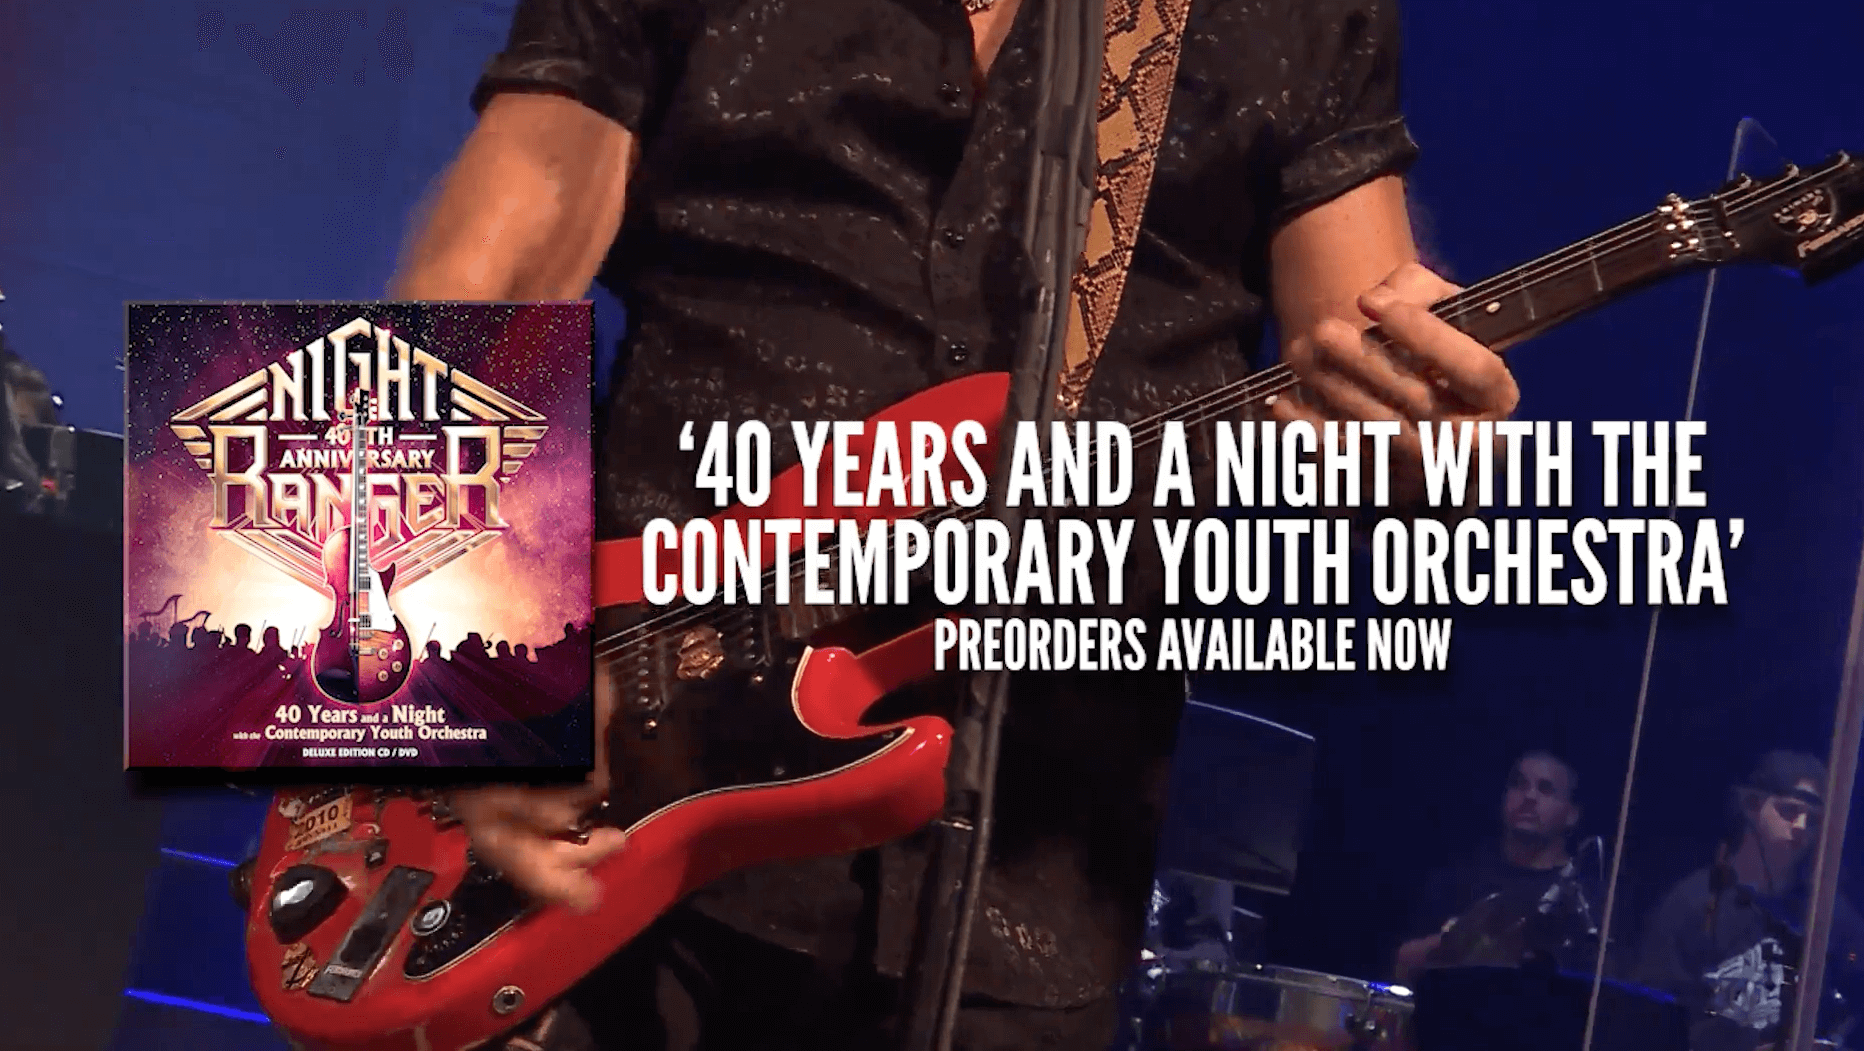 Brand-new live album '40 Years and a Night with Contemporary Youth  Orchestra' OUT October 20. New music video out TODAY! – Night Ranger